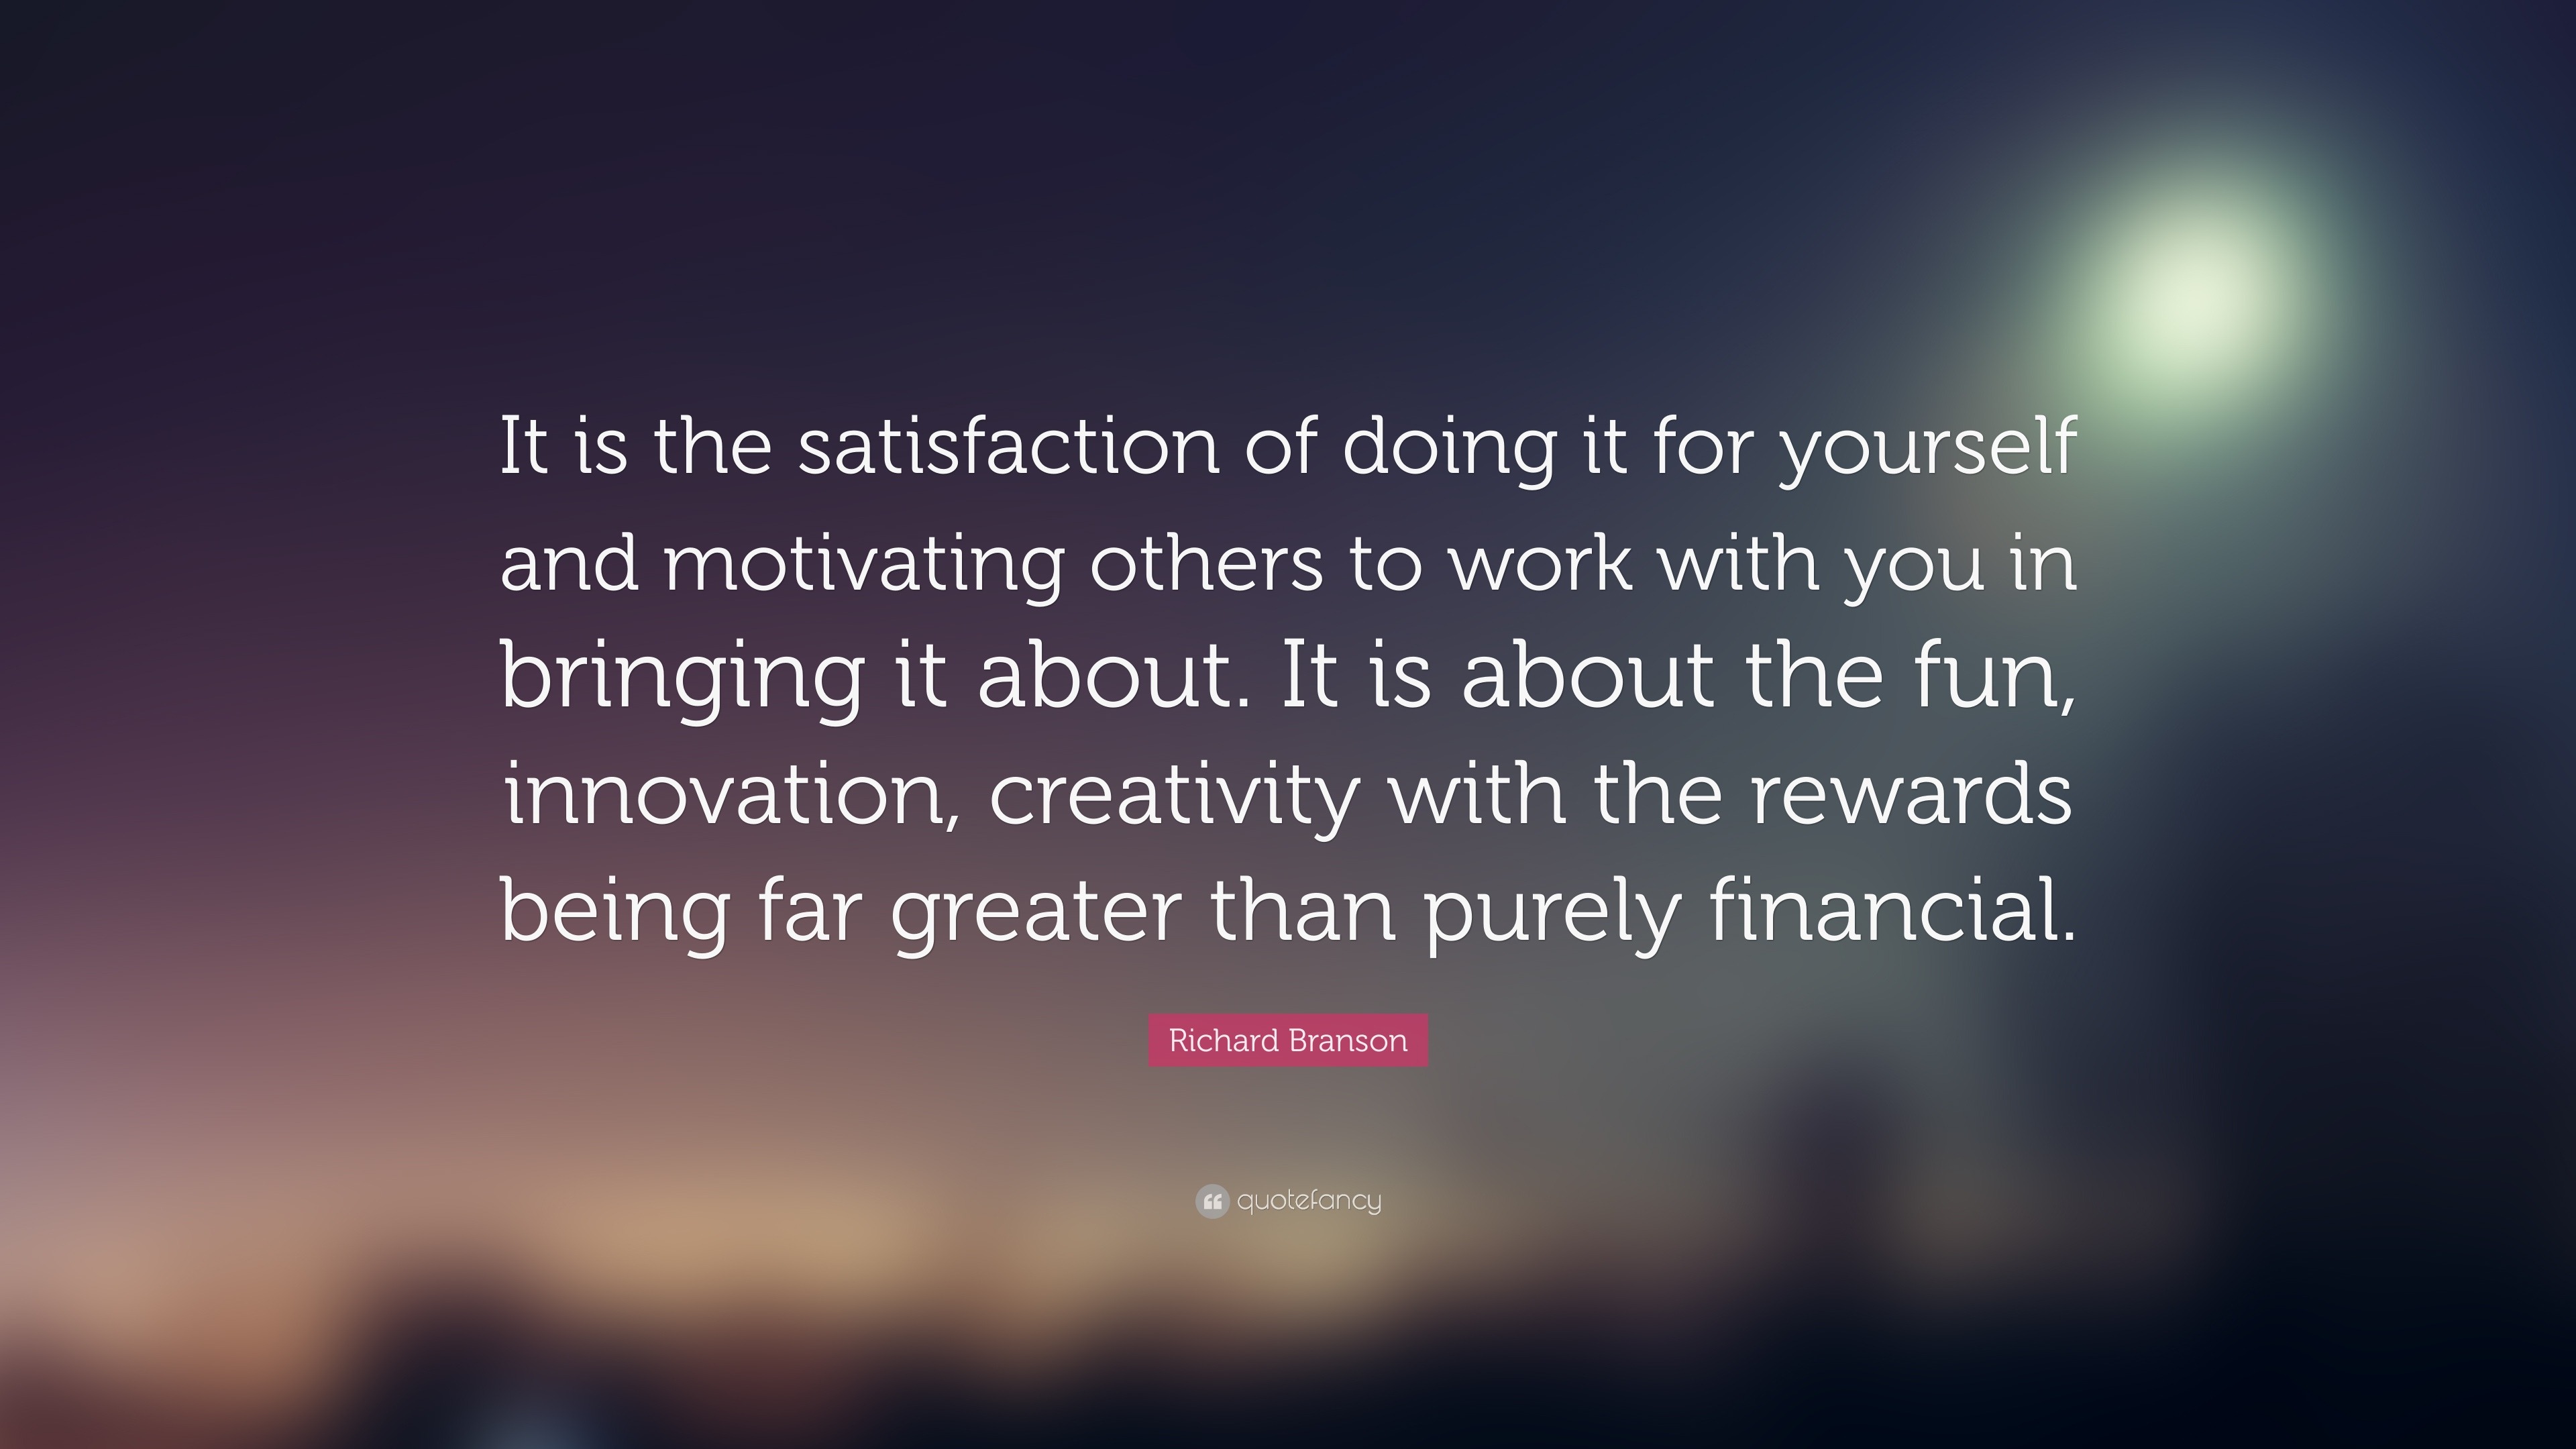 Richard Branson Quote: “It is the satisfaction of doing it for yourself